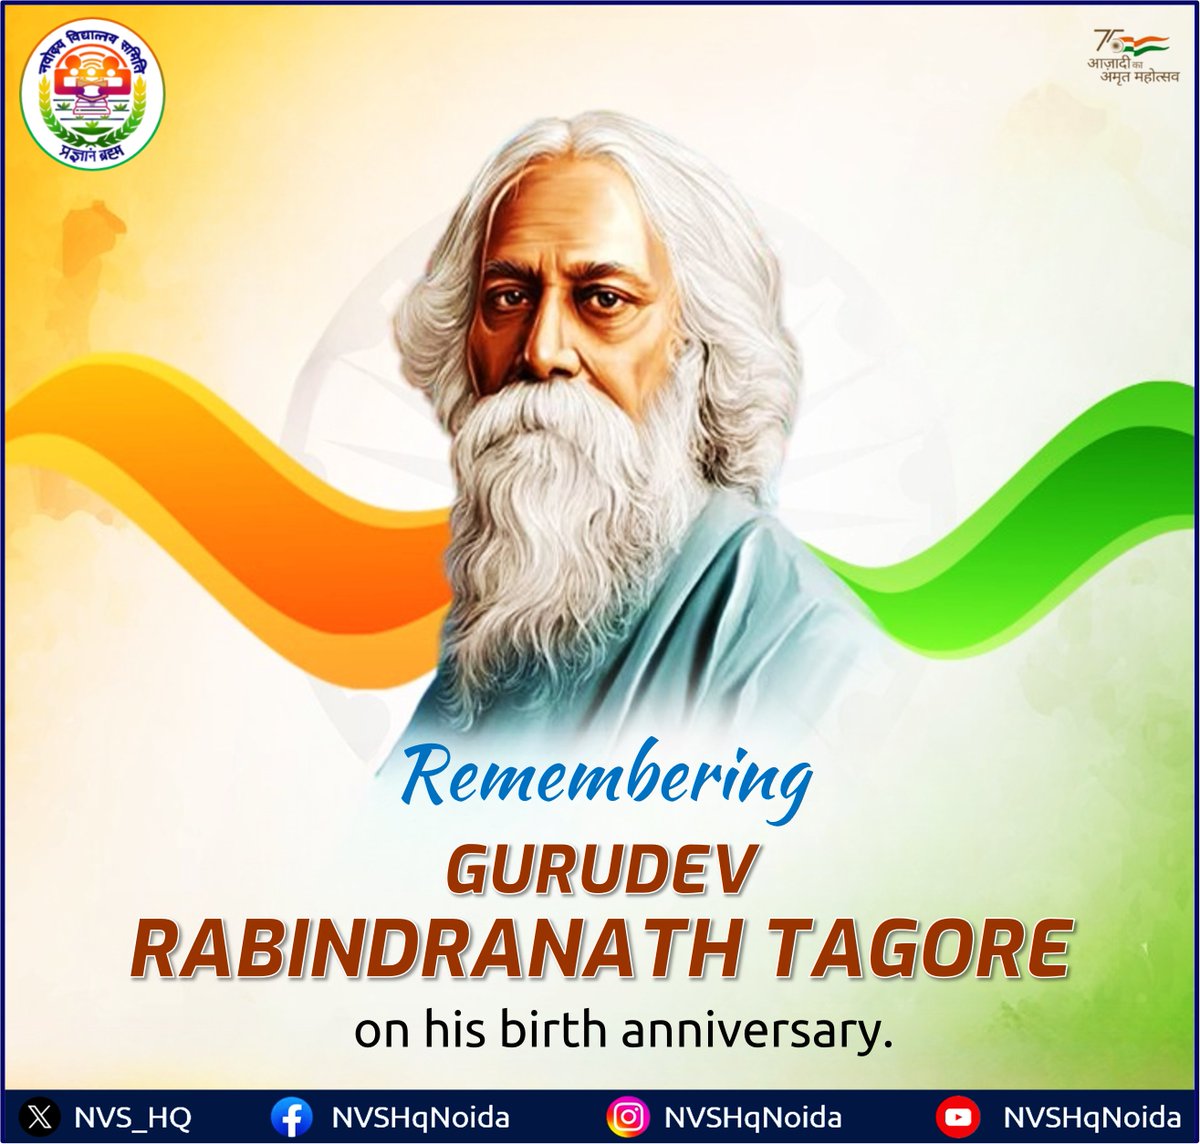 Tribute to Nobel Laureate and Composer of our #NationalAnthem ‘Jana Gana Mana' Gurudev #RabindranathTagore on his birth anniversary. His words remain a beacon of wisdom and inspiration, touching hearts around the globe. #TagoreJayanti